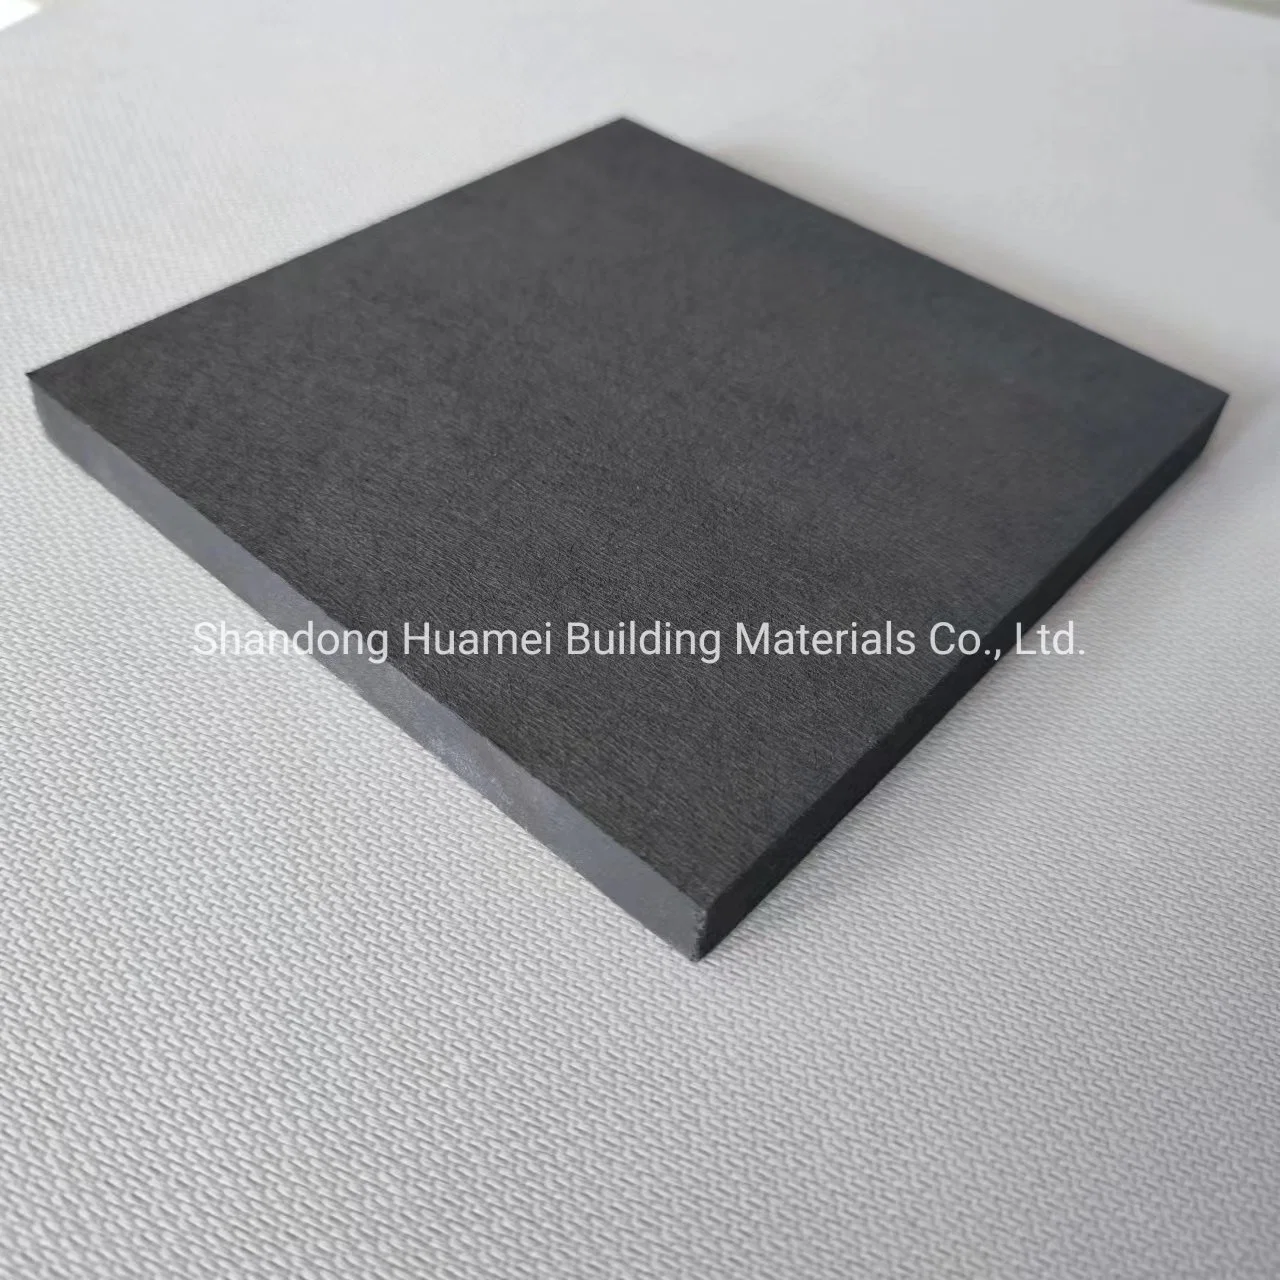 A24 Square Acoustic Tiles 2X2 Sound Absorbing Glass Wool Ceiling Tile with T24 Ceiling Grid